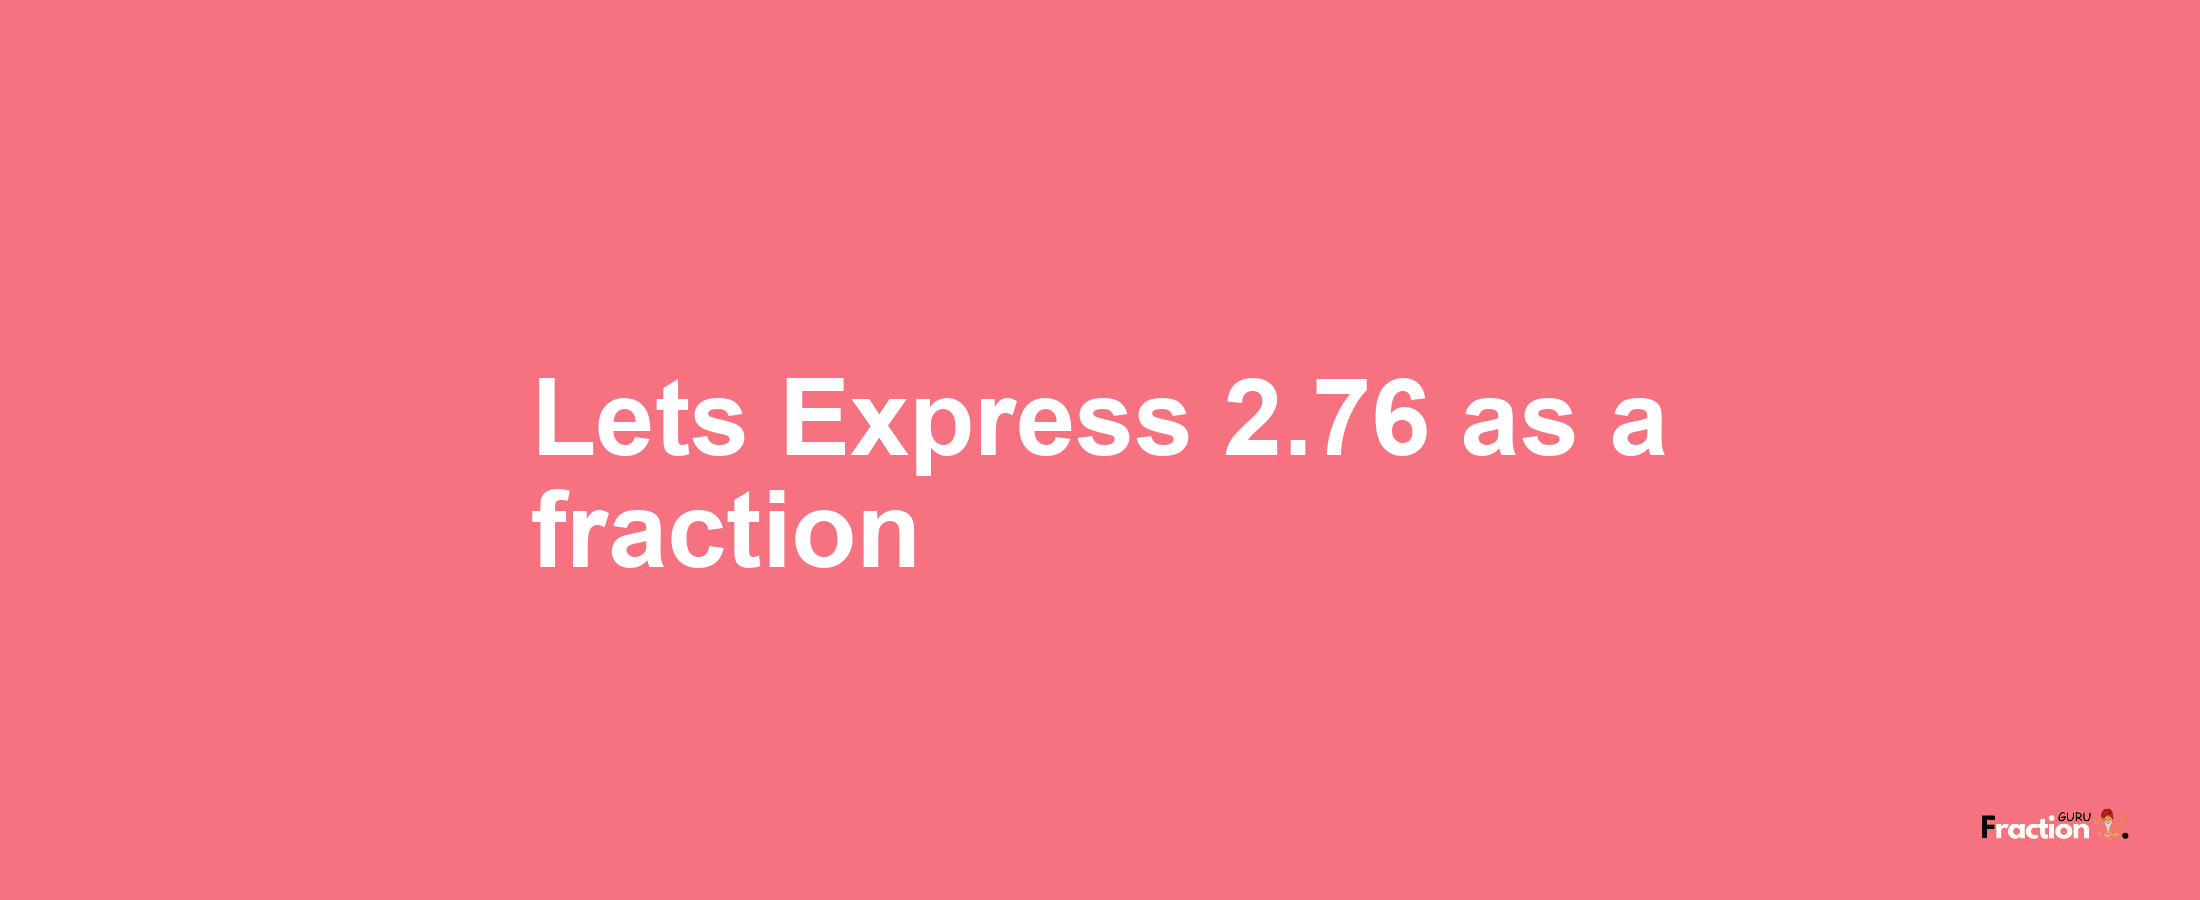 Lets Express 2.76 as afraction